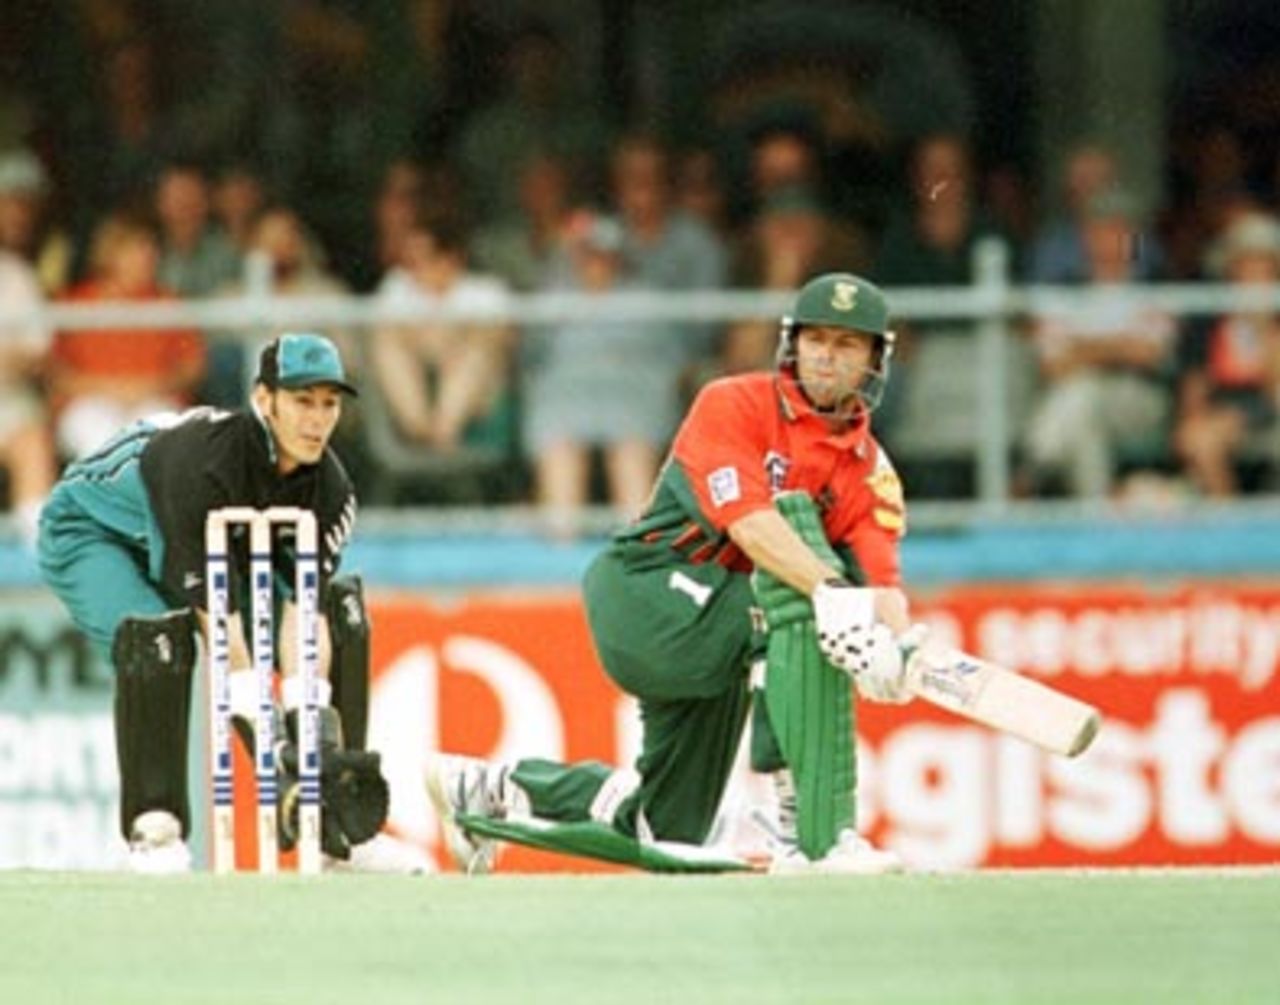 Gary Kirsten sweeps for 4 on his way to his century ...South Africa v New Zealand ODI at the 'Gabba, Brisbane, Friday January 9th 1998.